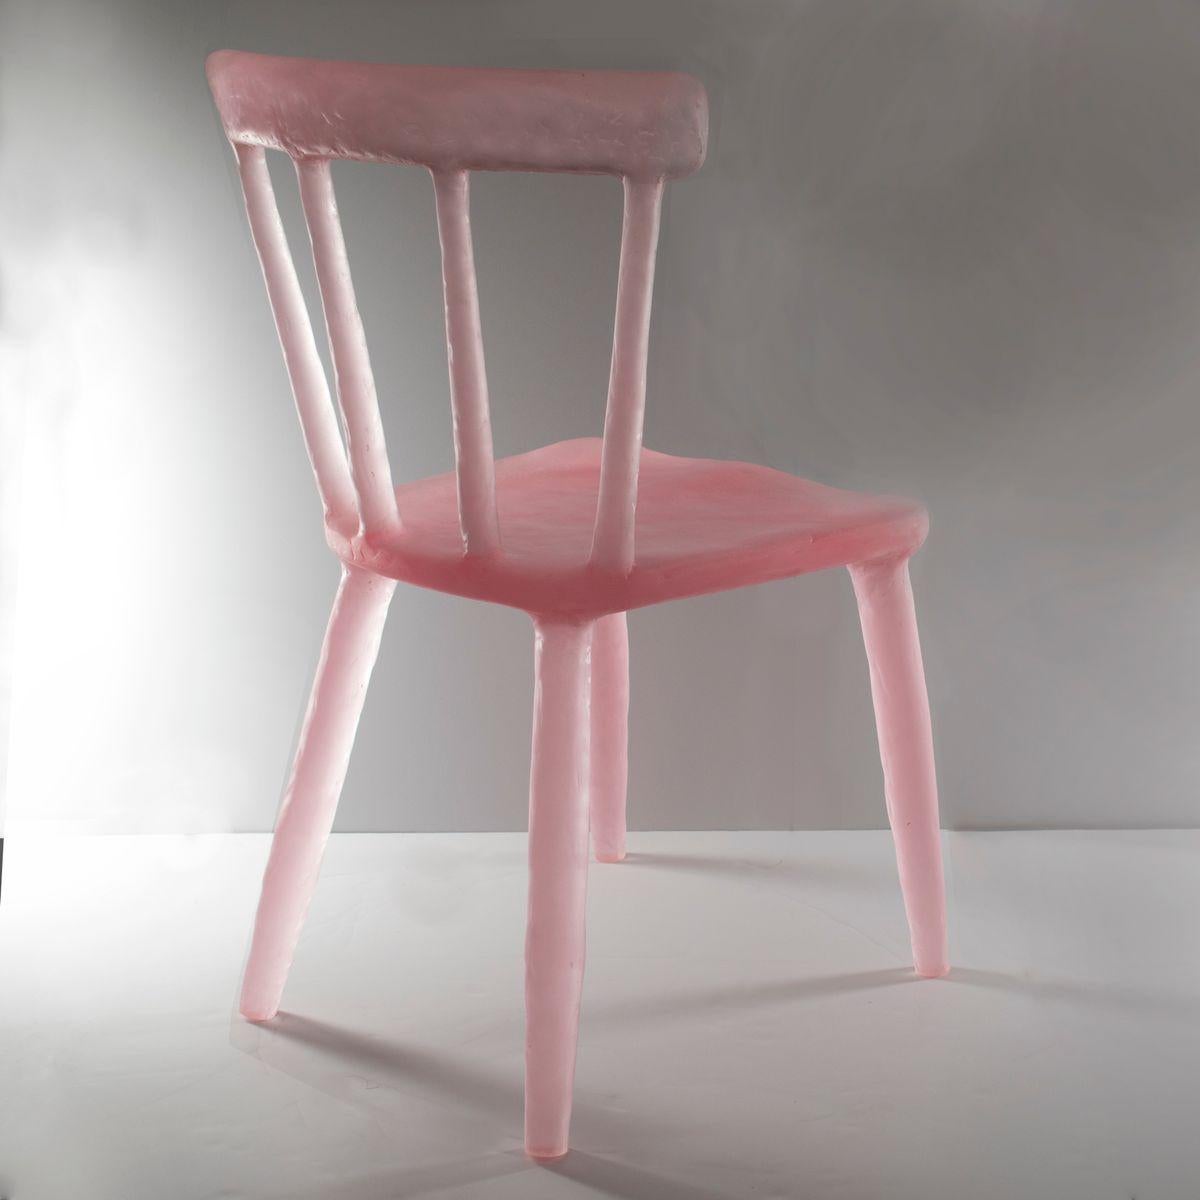 pink plastic chairs